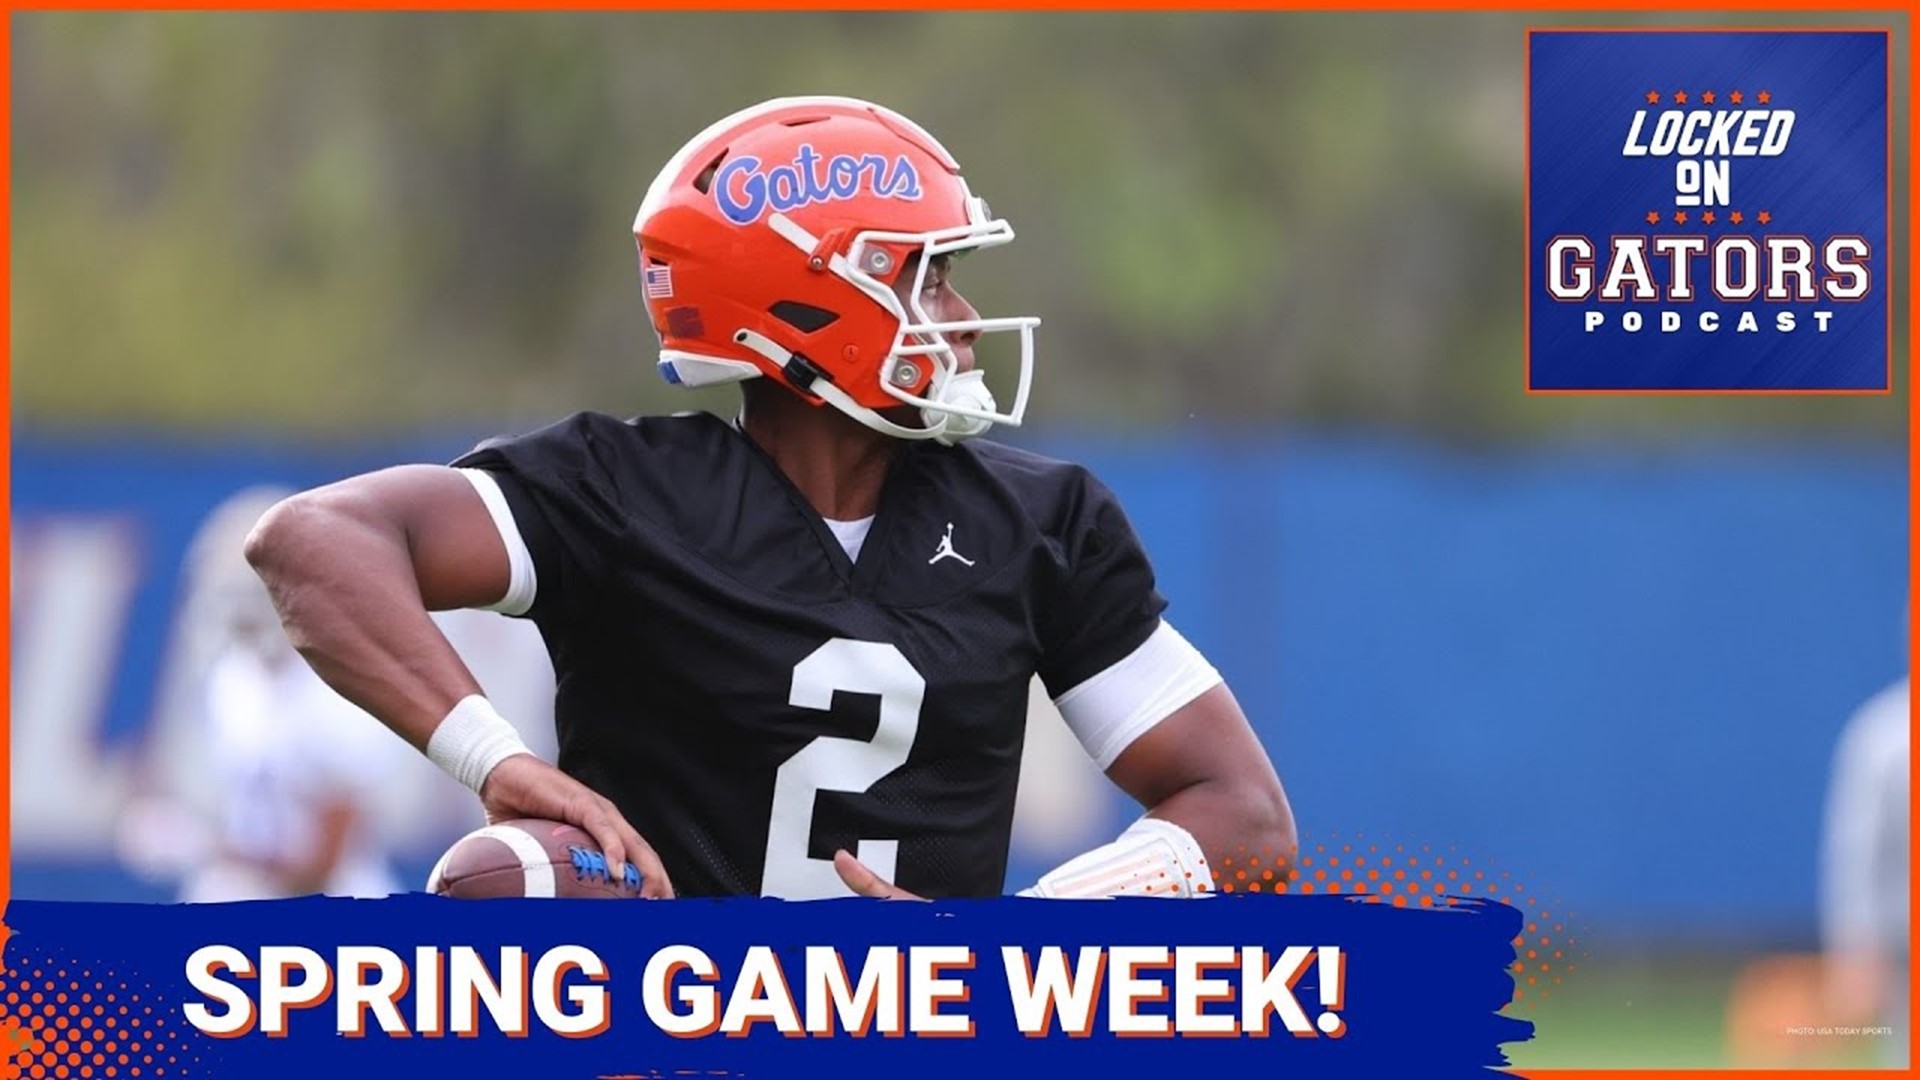 DJ Lagway is Florida Gators' Most Exciting Player for Orange and Blue Spring Game